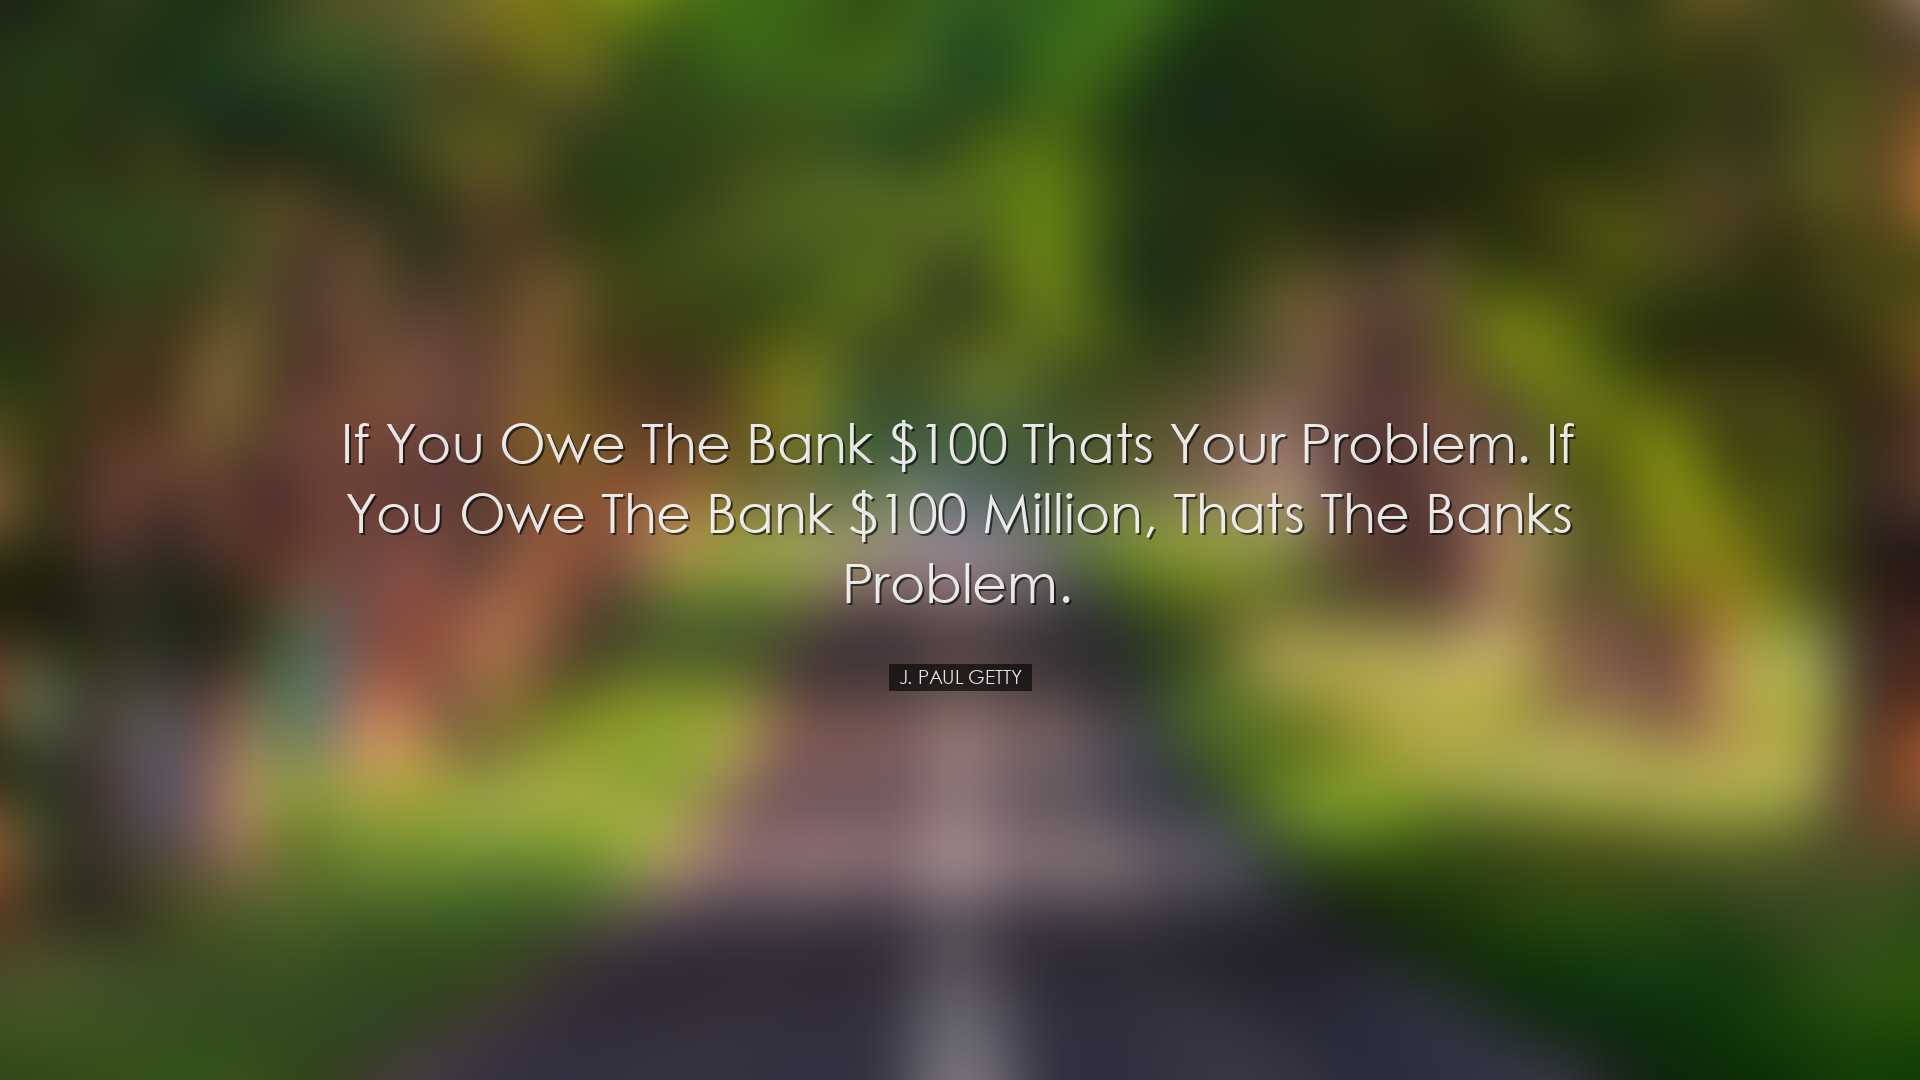 If you owe the bank $100 thats your problem. If you owe the bank $